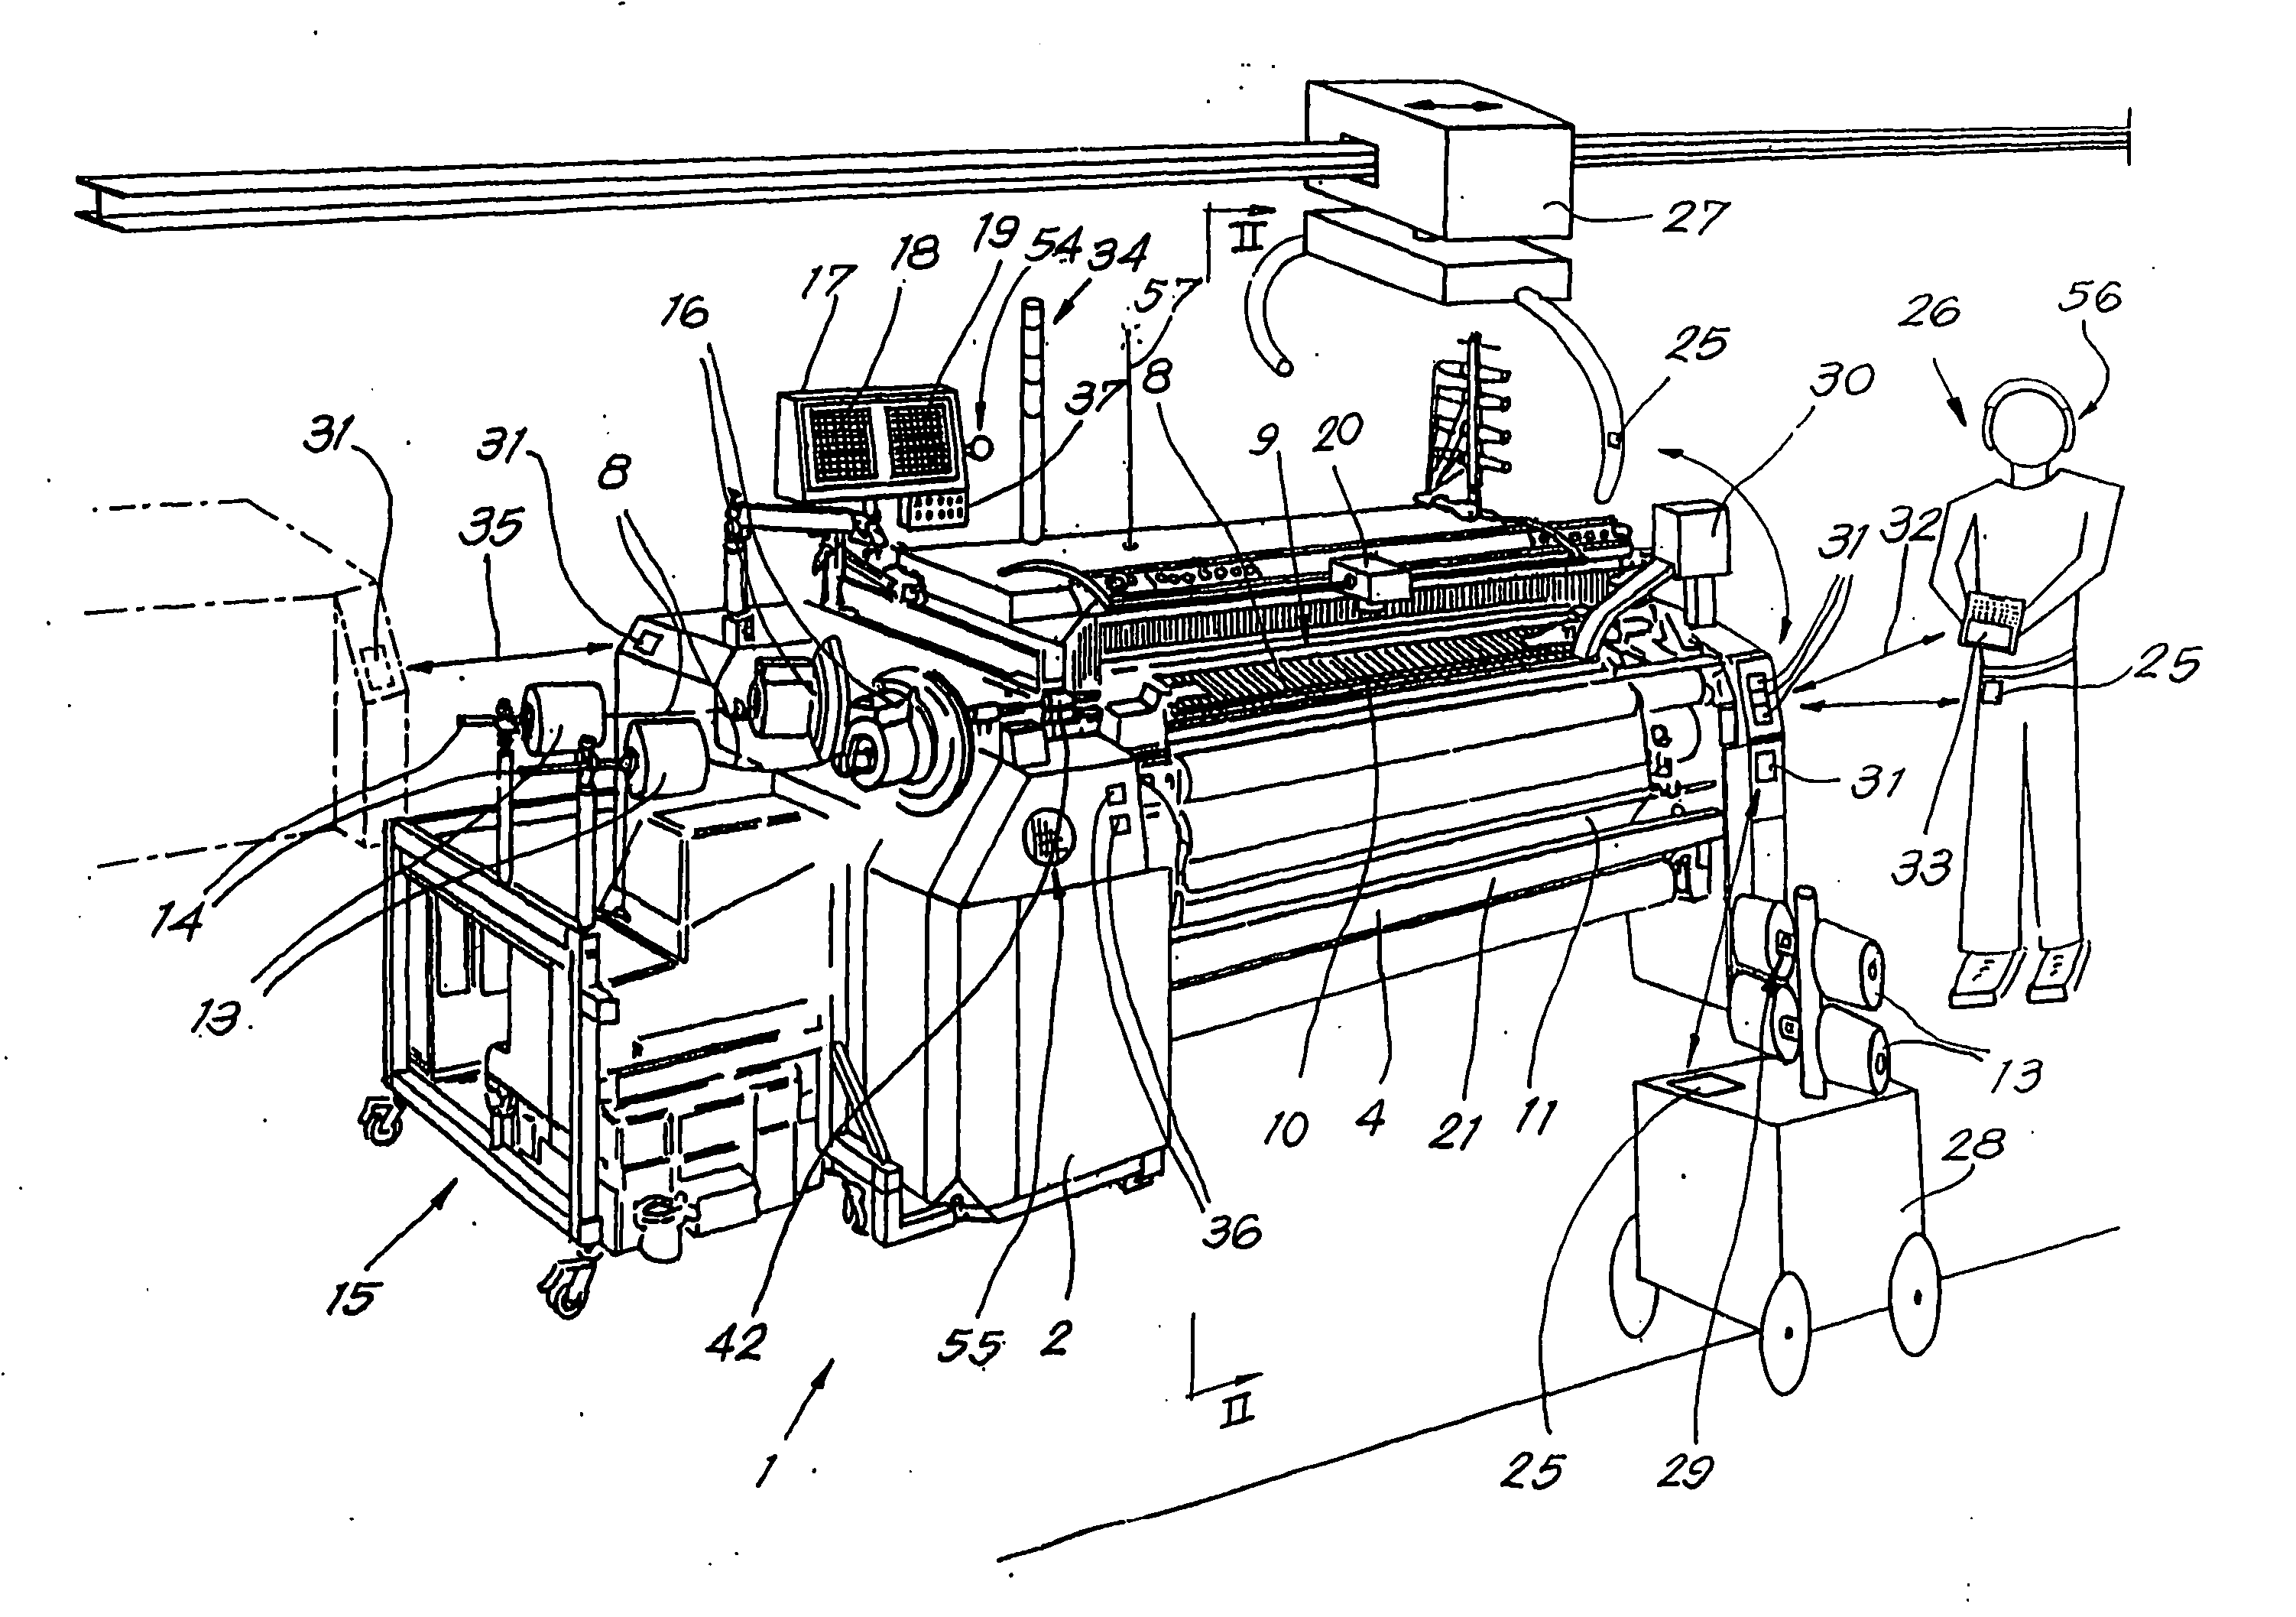 Method for optimizing a textile production process